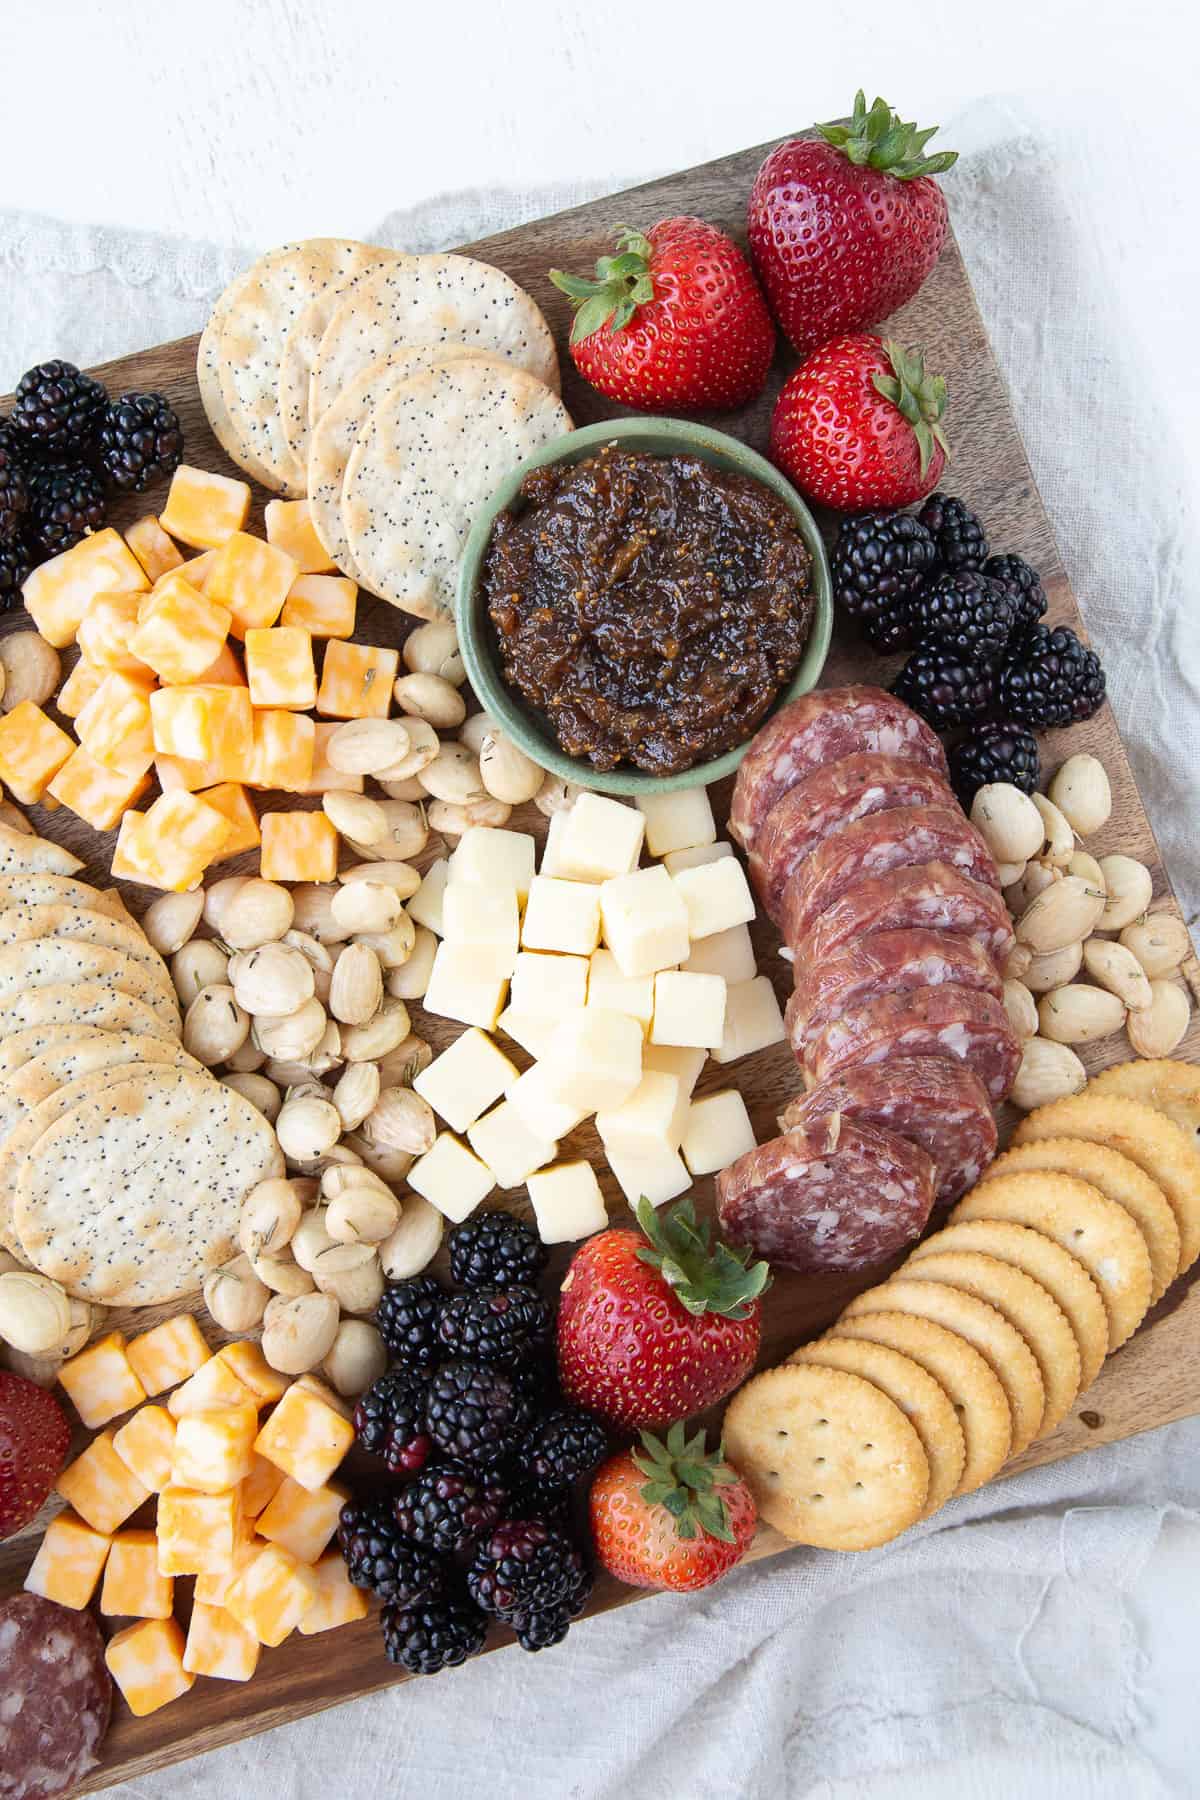 cheese cubes, salami, fruit, nuts, and crackers on a wooden board.